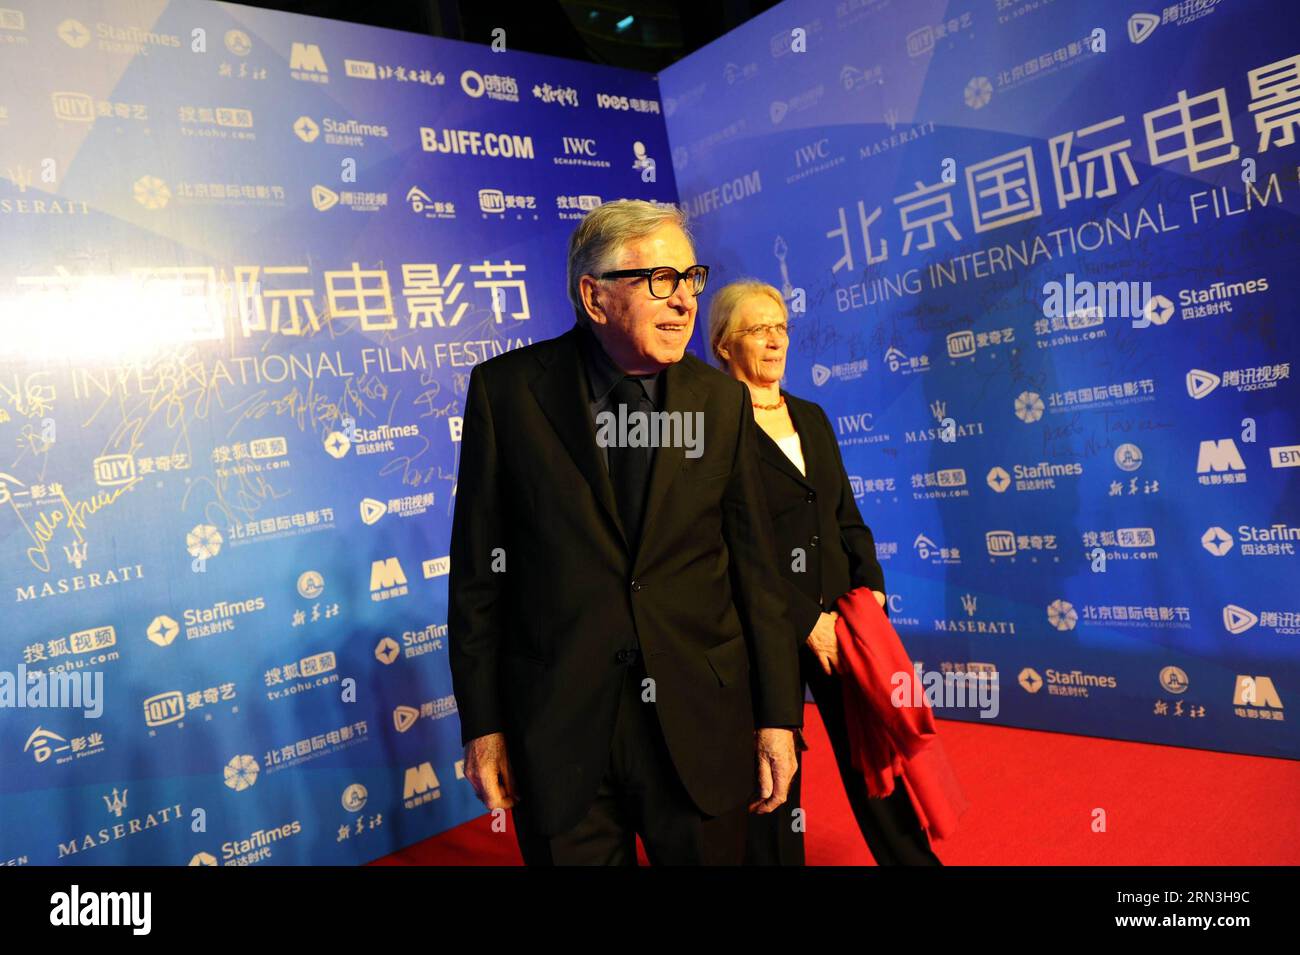 (150417) -- BEIJING, April 17, 2015 -- Paolo Taviani, one of the directors of Wondrous Bocoaccio , (L) attends premiere of the movie with his wife Lina Nerli Taviani during the fifth Beijing International Film Festival (BJIFF) in Beijing, capital of China, April 16, 2015. The movie premiered at the BJIFF Friday. ) (mt) CHINA-BEIJING-FILM FESTIVAL-WONDROUS BOCOACCIO-PREMIERE (CN) LixRenzi PUBLICATIONxNOTxINxCHN   Beijing April 17 2015 Paolo  One of The Directors of   l Attends Premiere of The Movie With His wife Lina Nerli  during The Fifth Beijing International Film Festival  in Beijing Capita Stock Photo